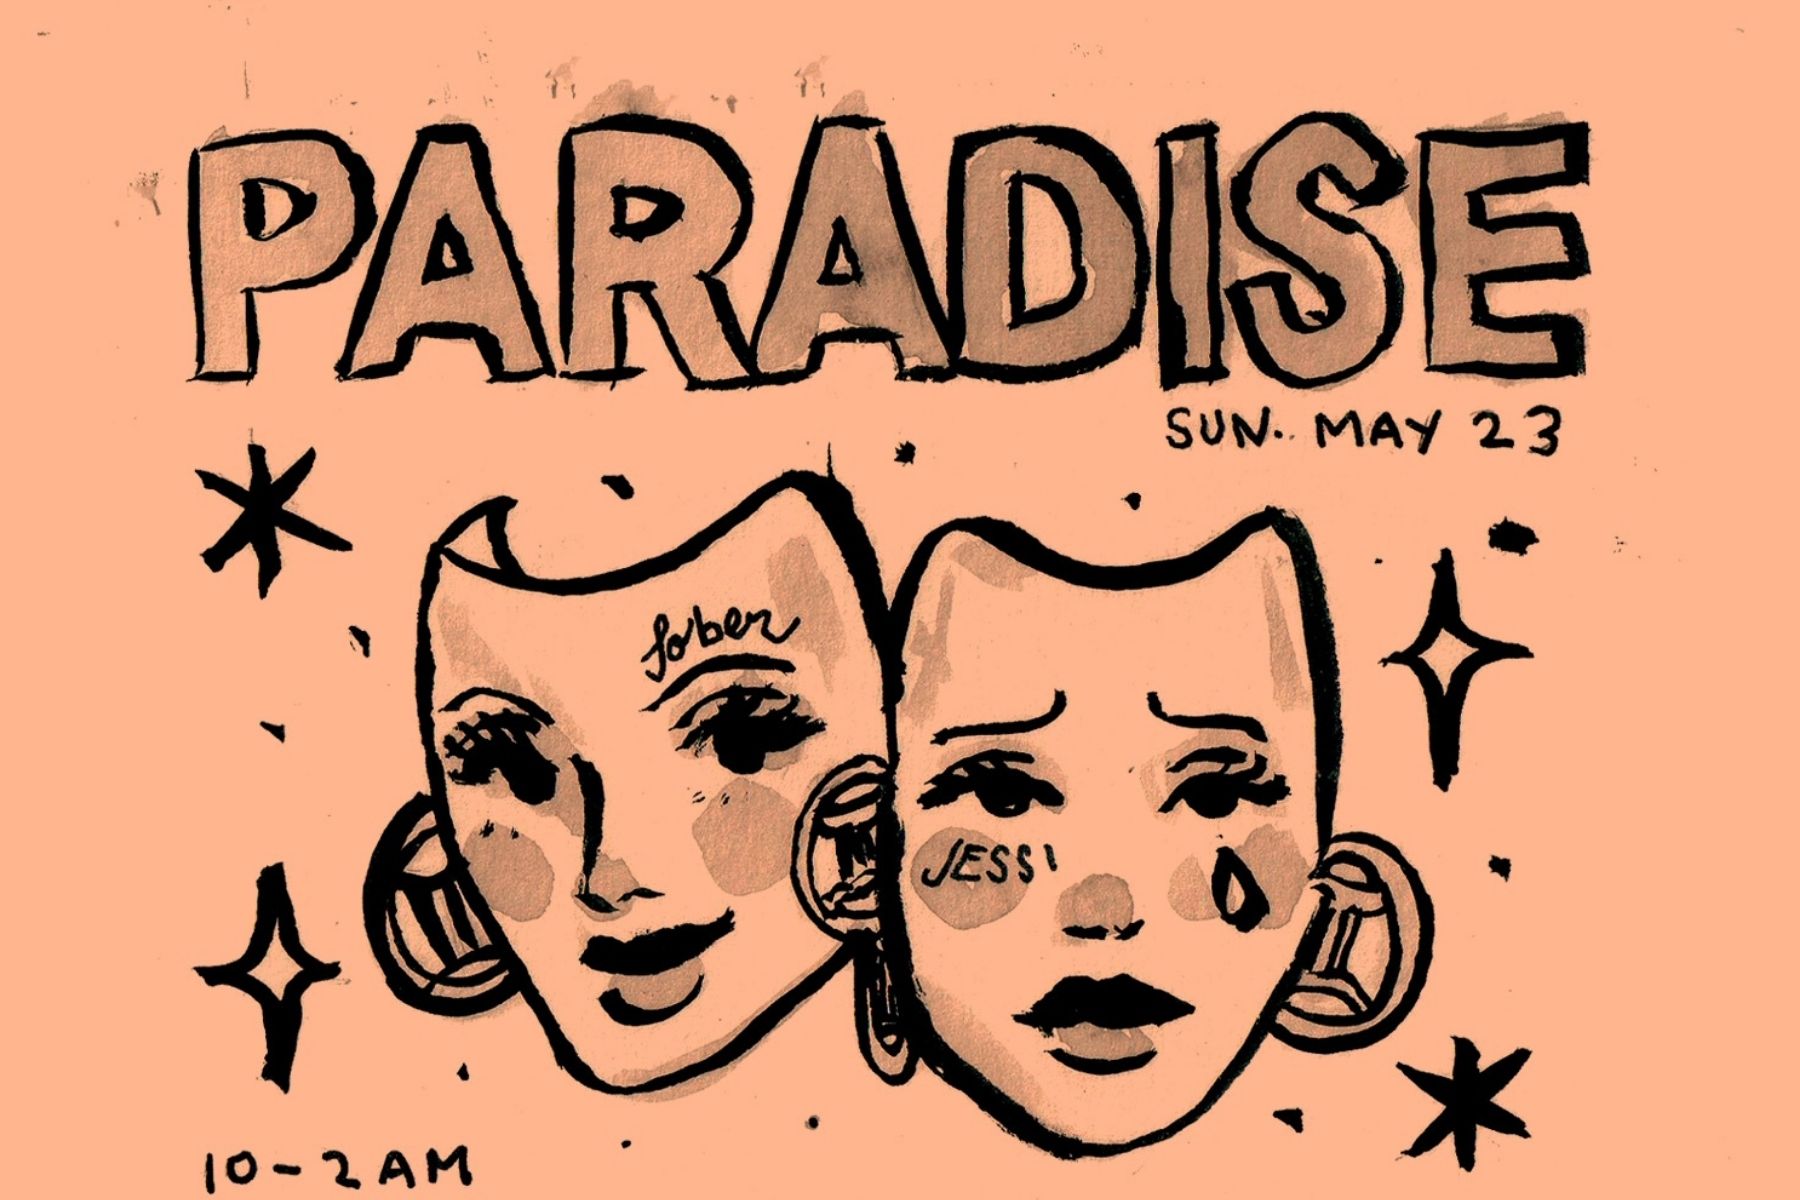 hand painted flyer by Jessi Pereira for Paradise, a monthly dance party in Oak Cliff